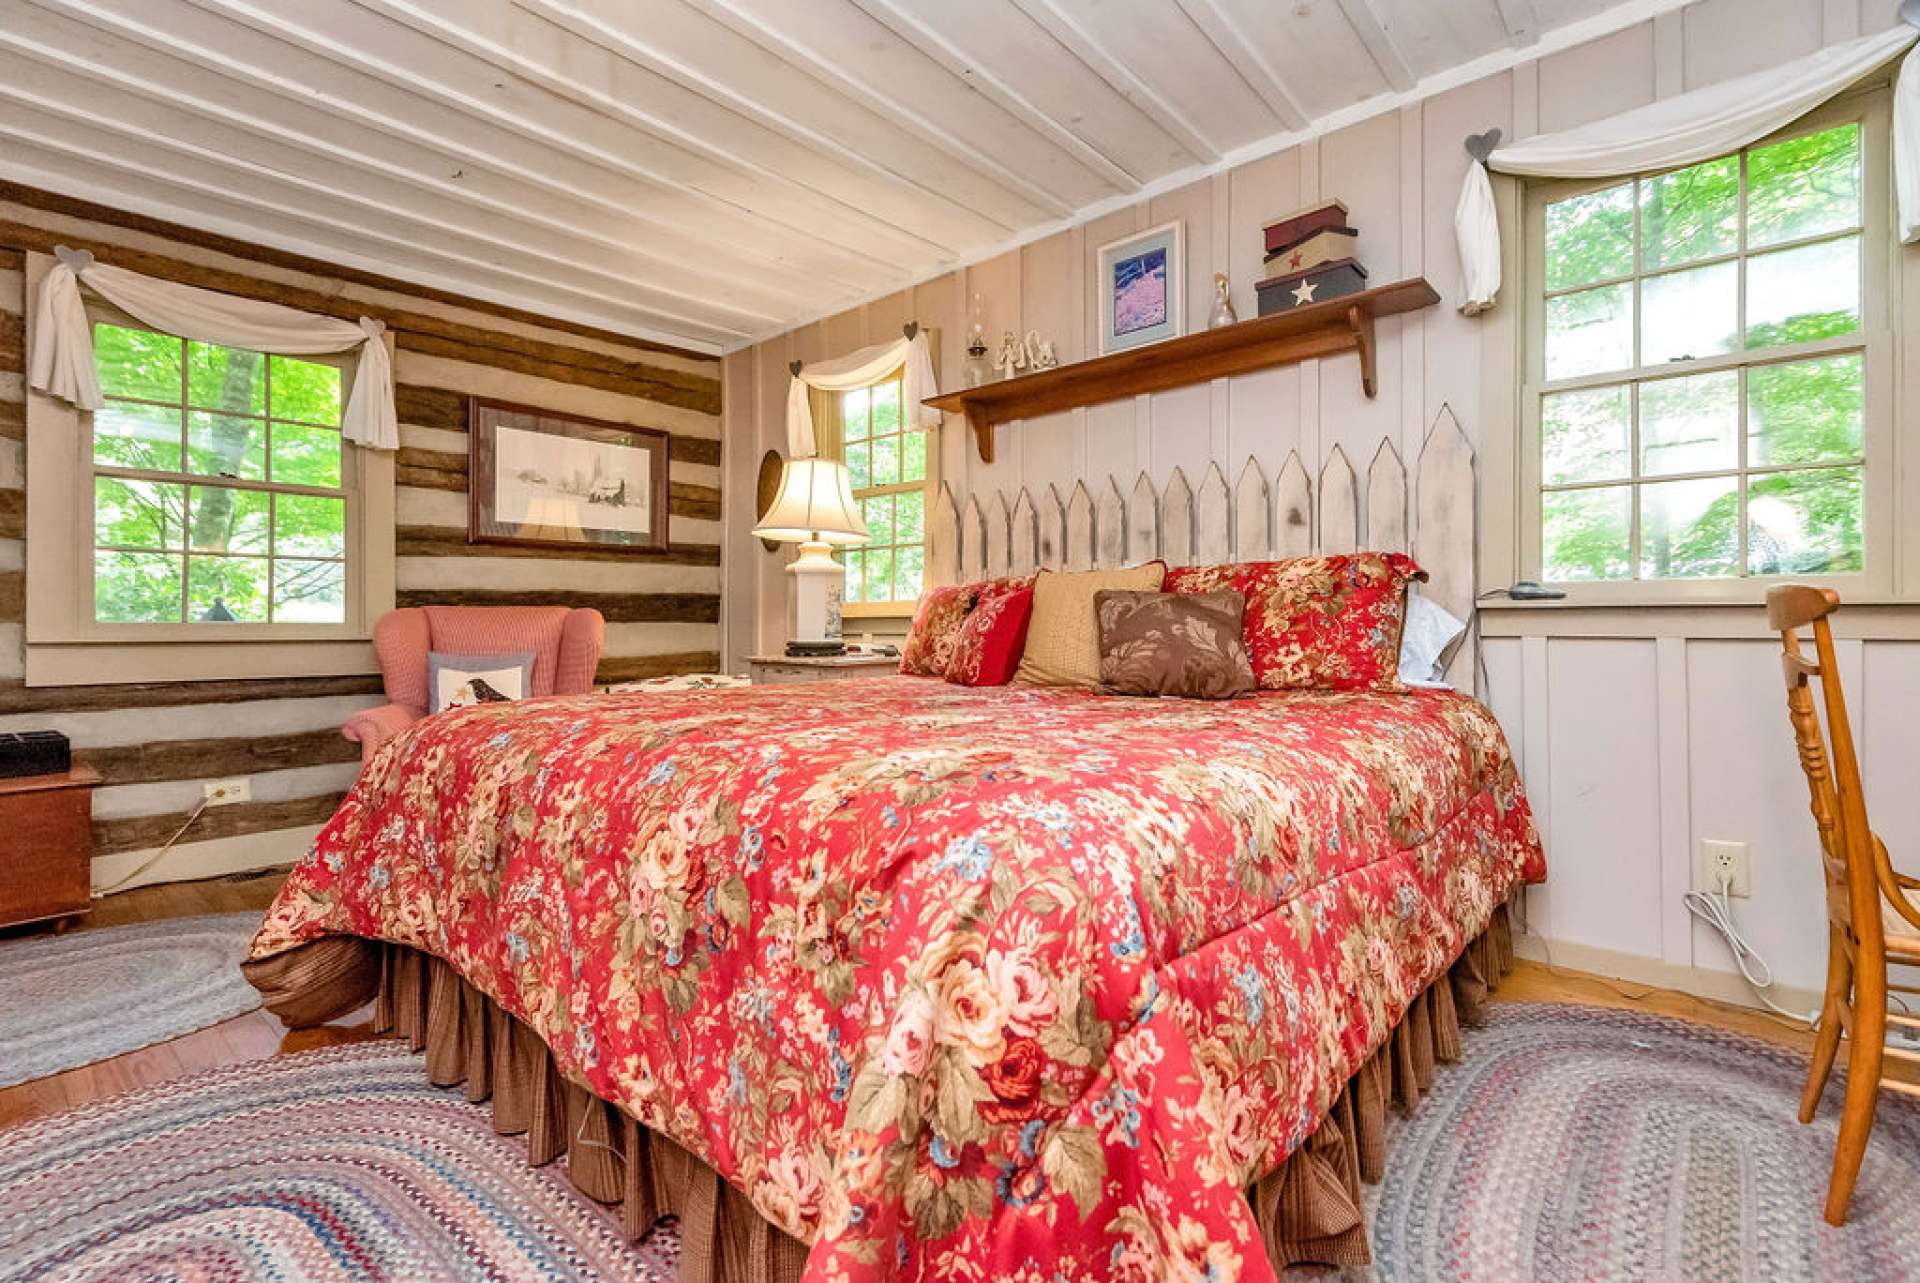 The board and batten compliment the logs and add a country charm to the room.